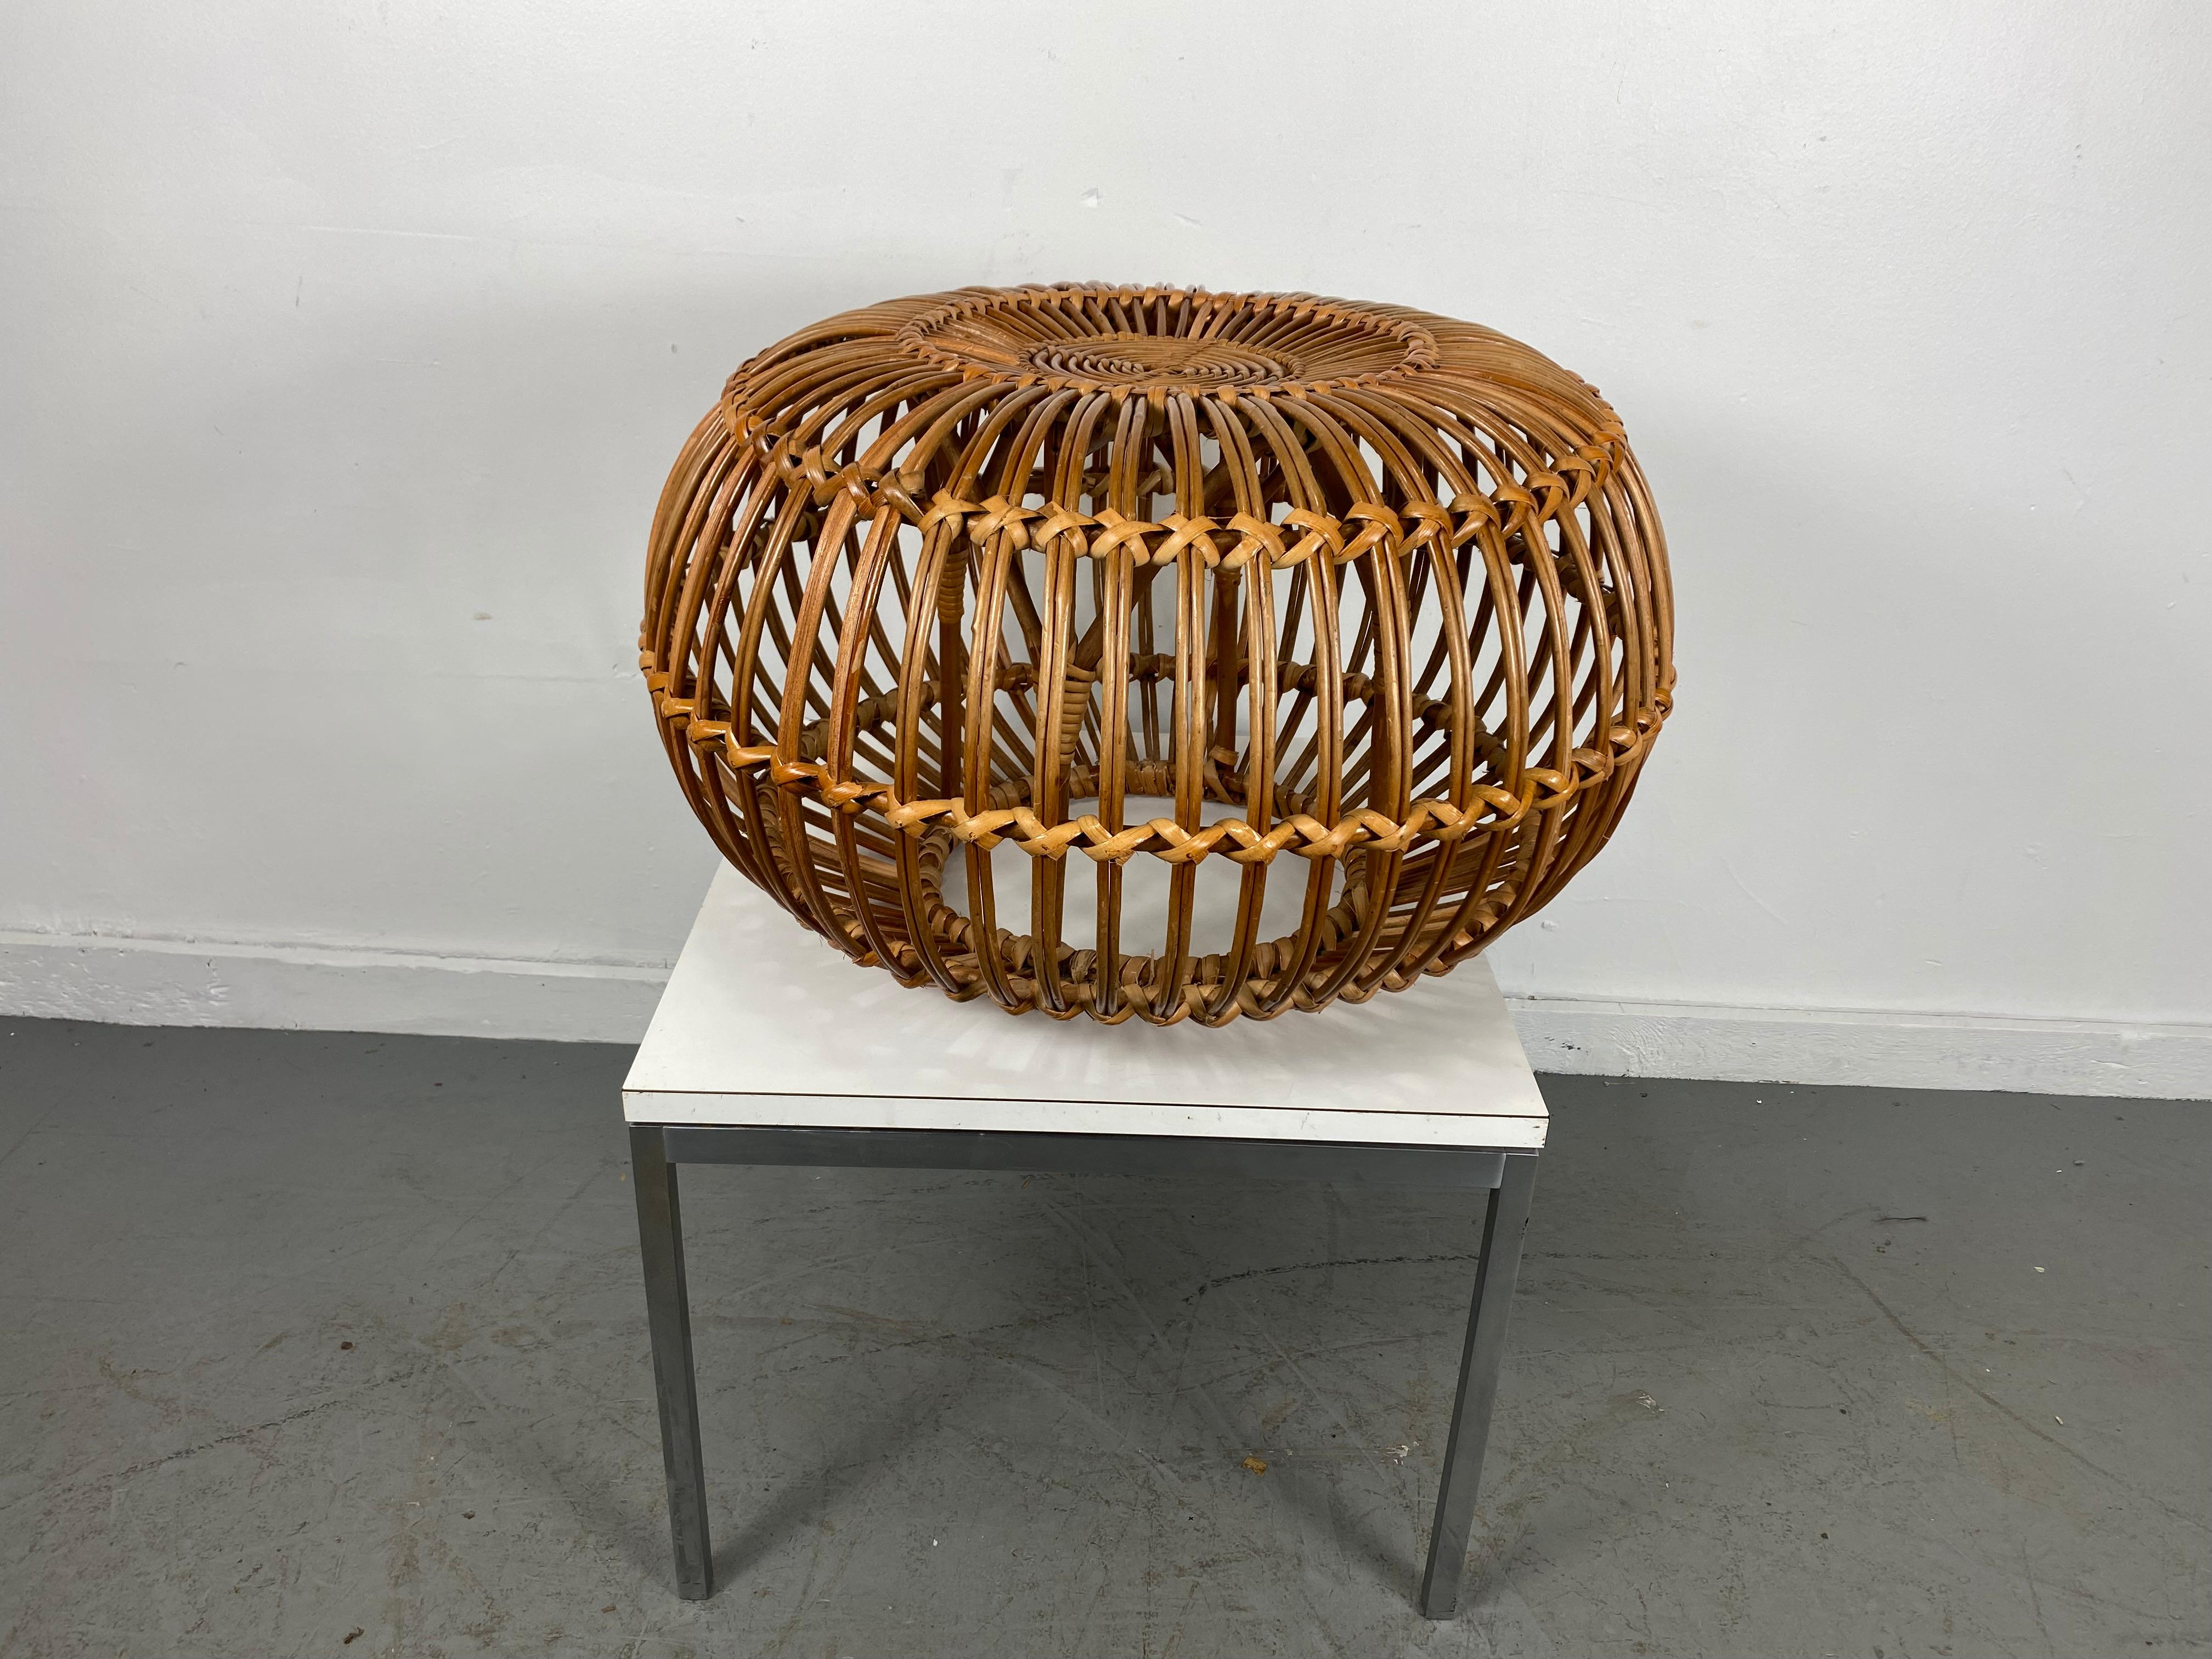 A Mid-Century Modern vintage rattan pouf or stool, which was designed attributed to Franco Albini. Italy 1950s. Very stable, although lightweight. Wonderful original condition.